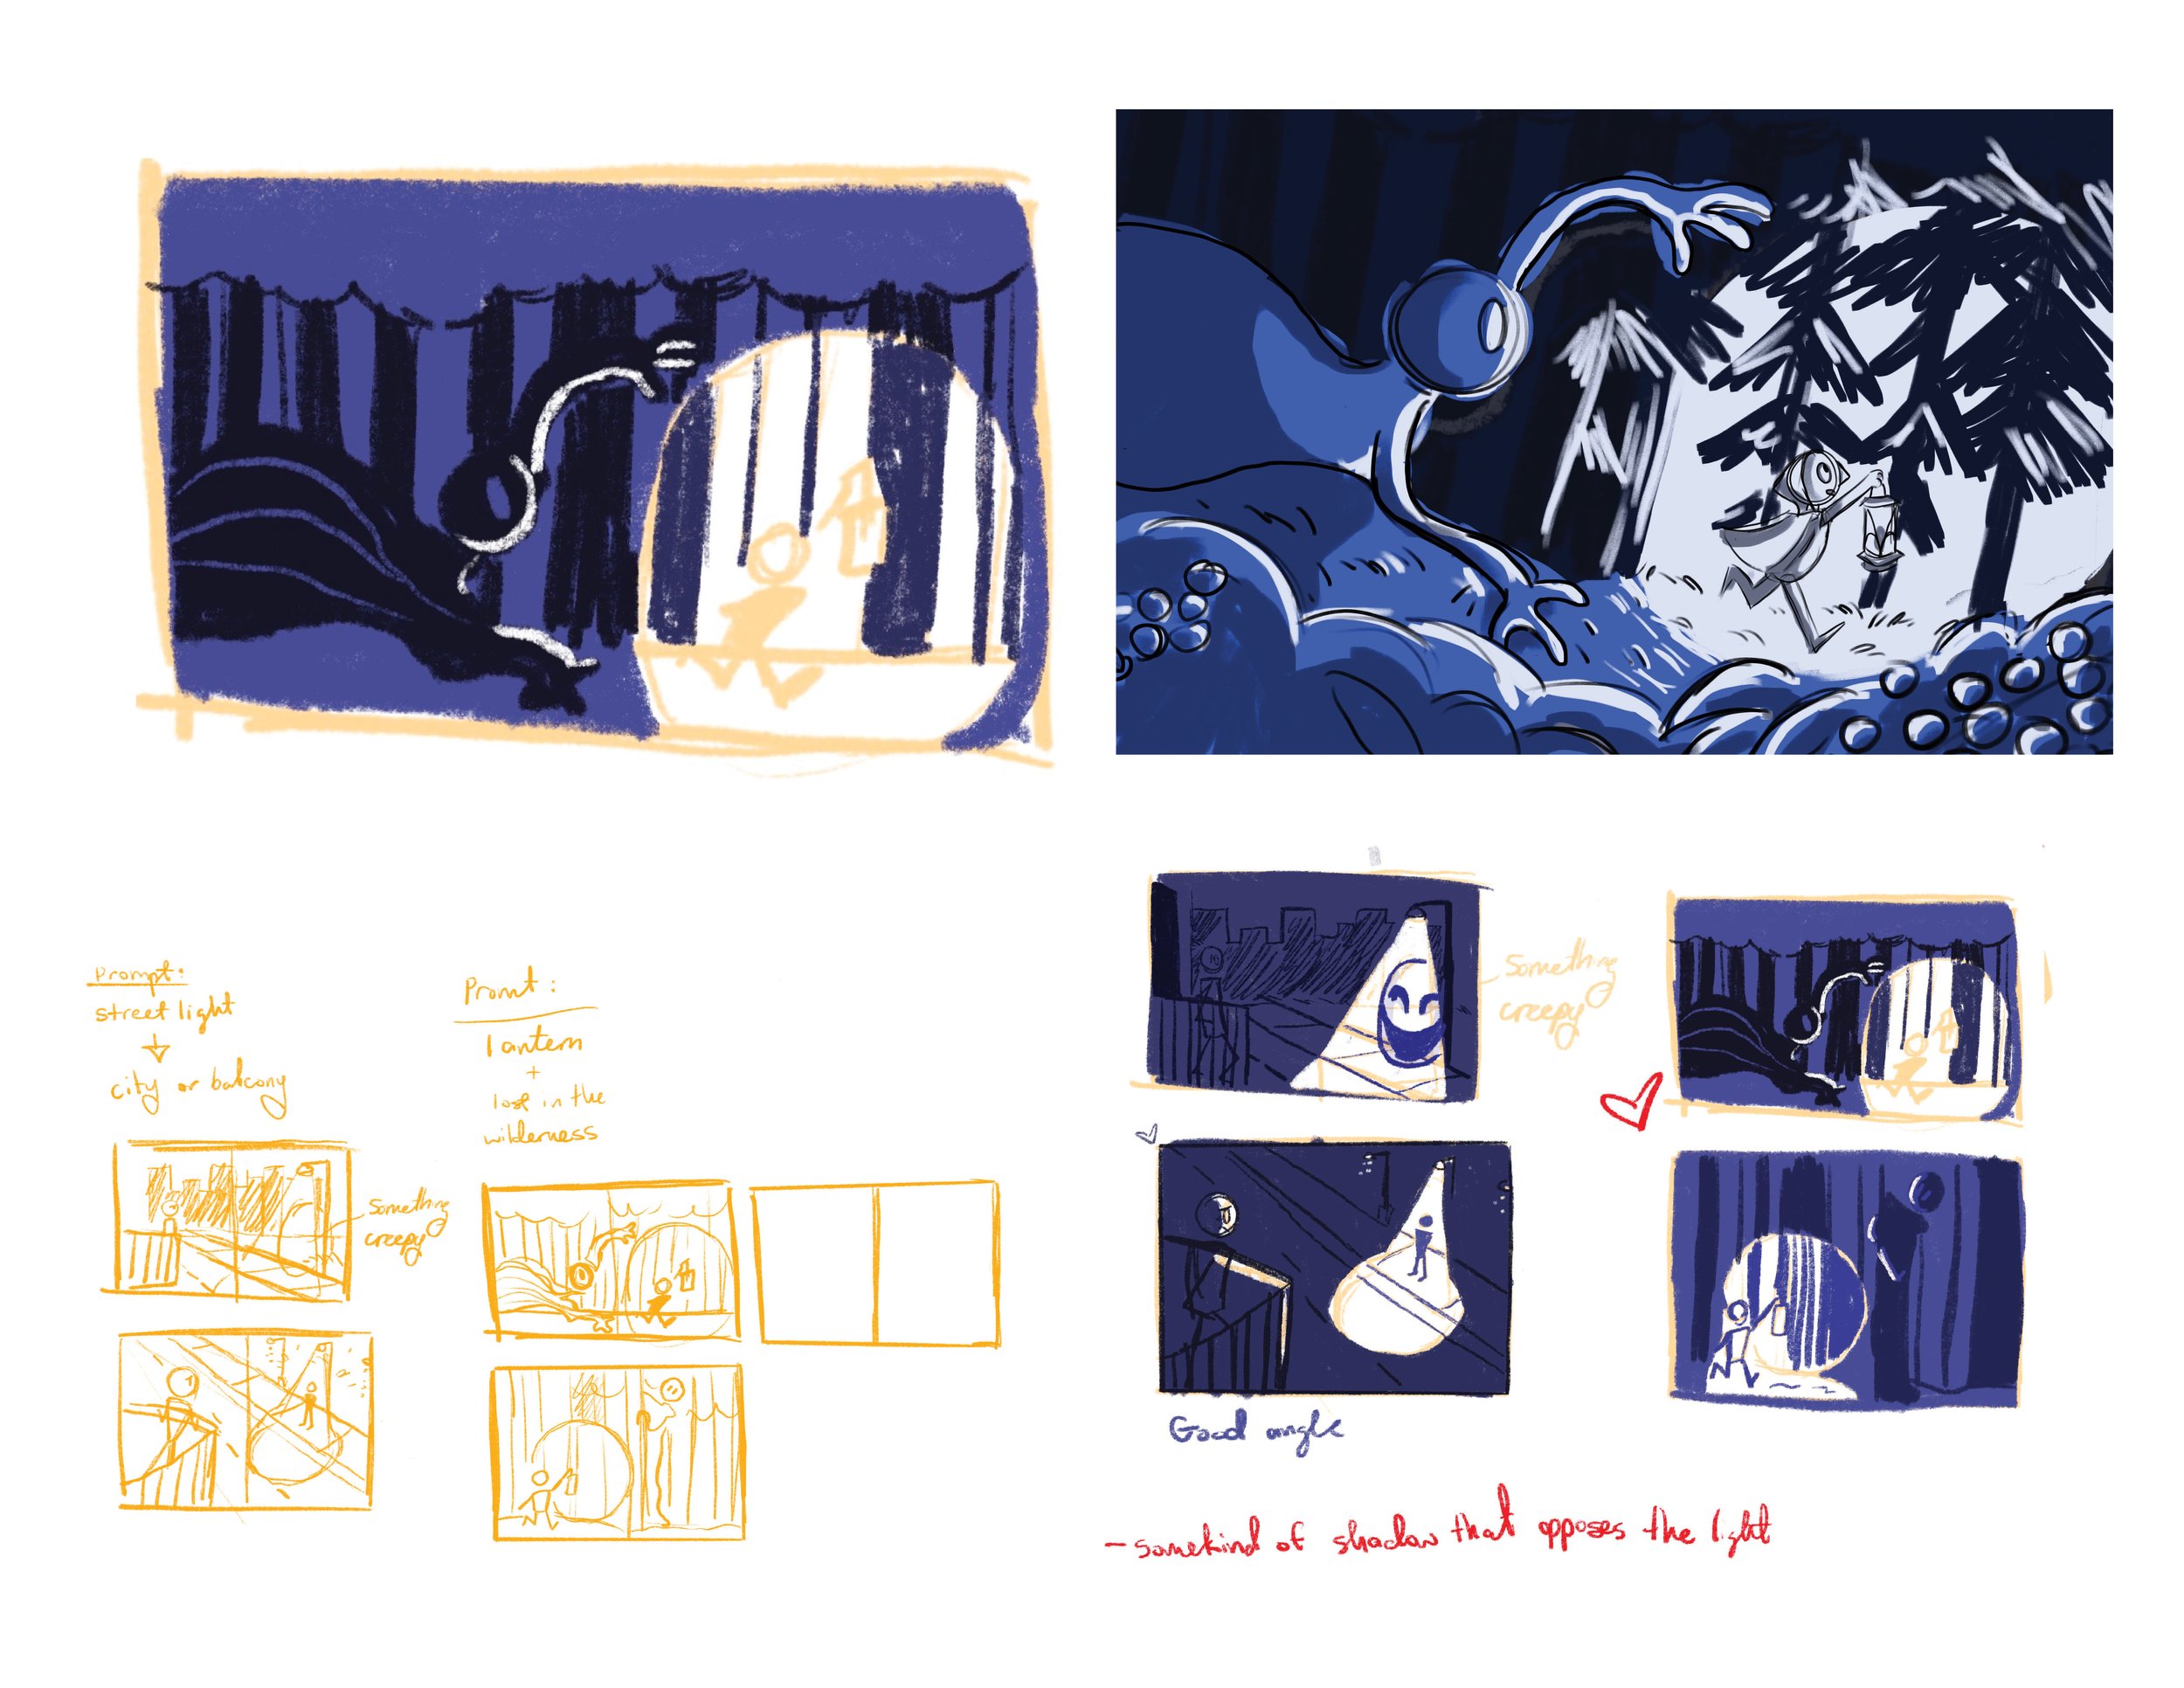  Strong Light Source Book Spread Illustration Sketches/ Thumbnails